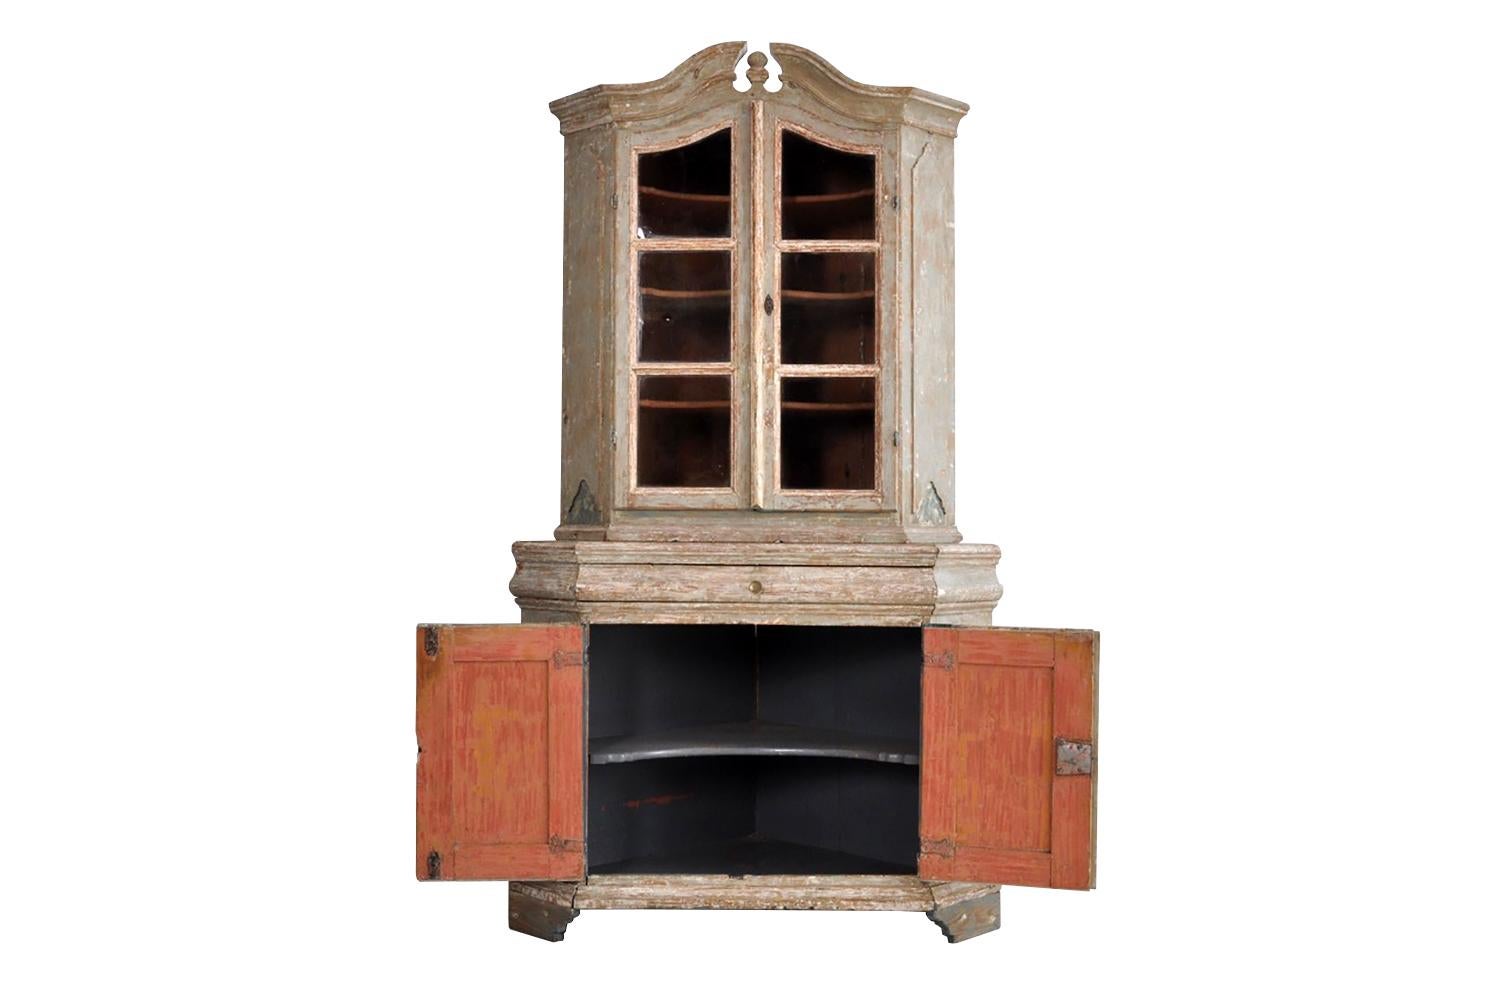 This Swedish 18th century corner cabinet features fine carved detailing and is dry scraped to original paint. A fine example of quality period Swedish furniture making, this cabinet has four front doors in two pairs, the upper doors have glass